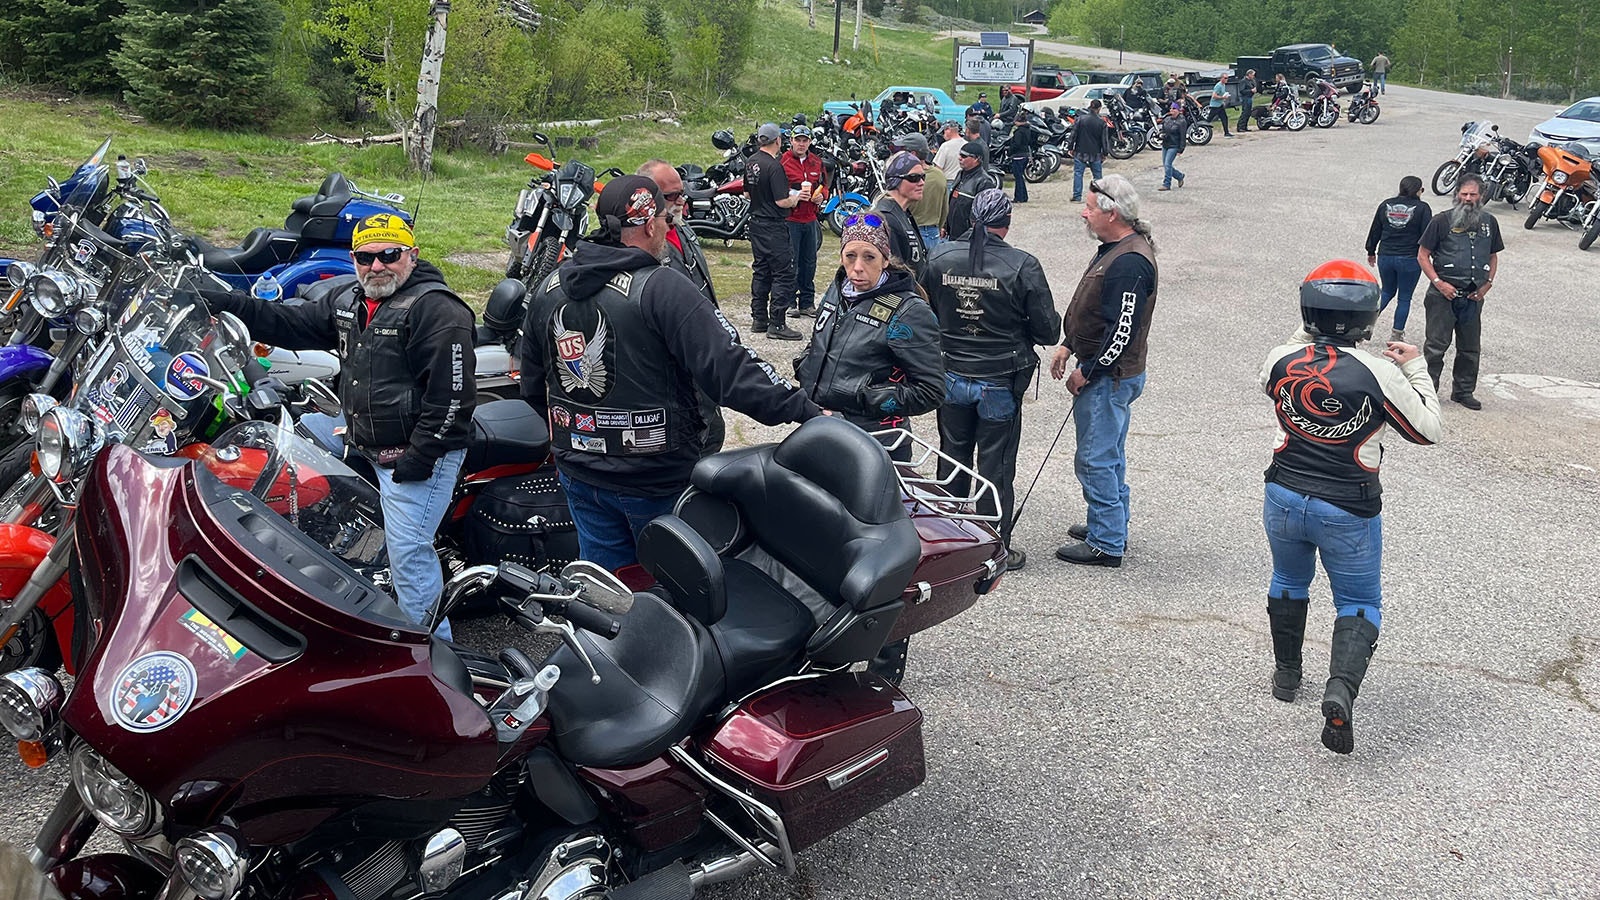 Boulder Poker Run riders at their first stop at The Place in Cora, Wyoming.